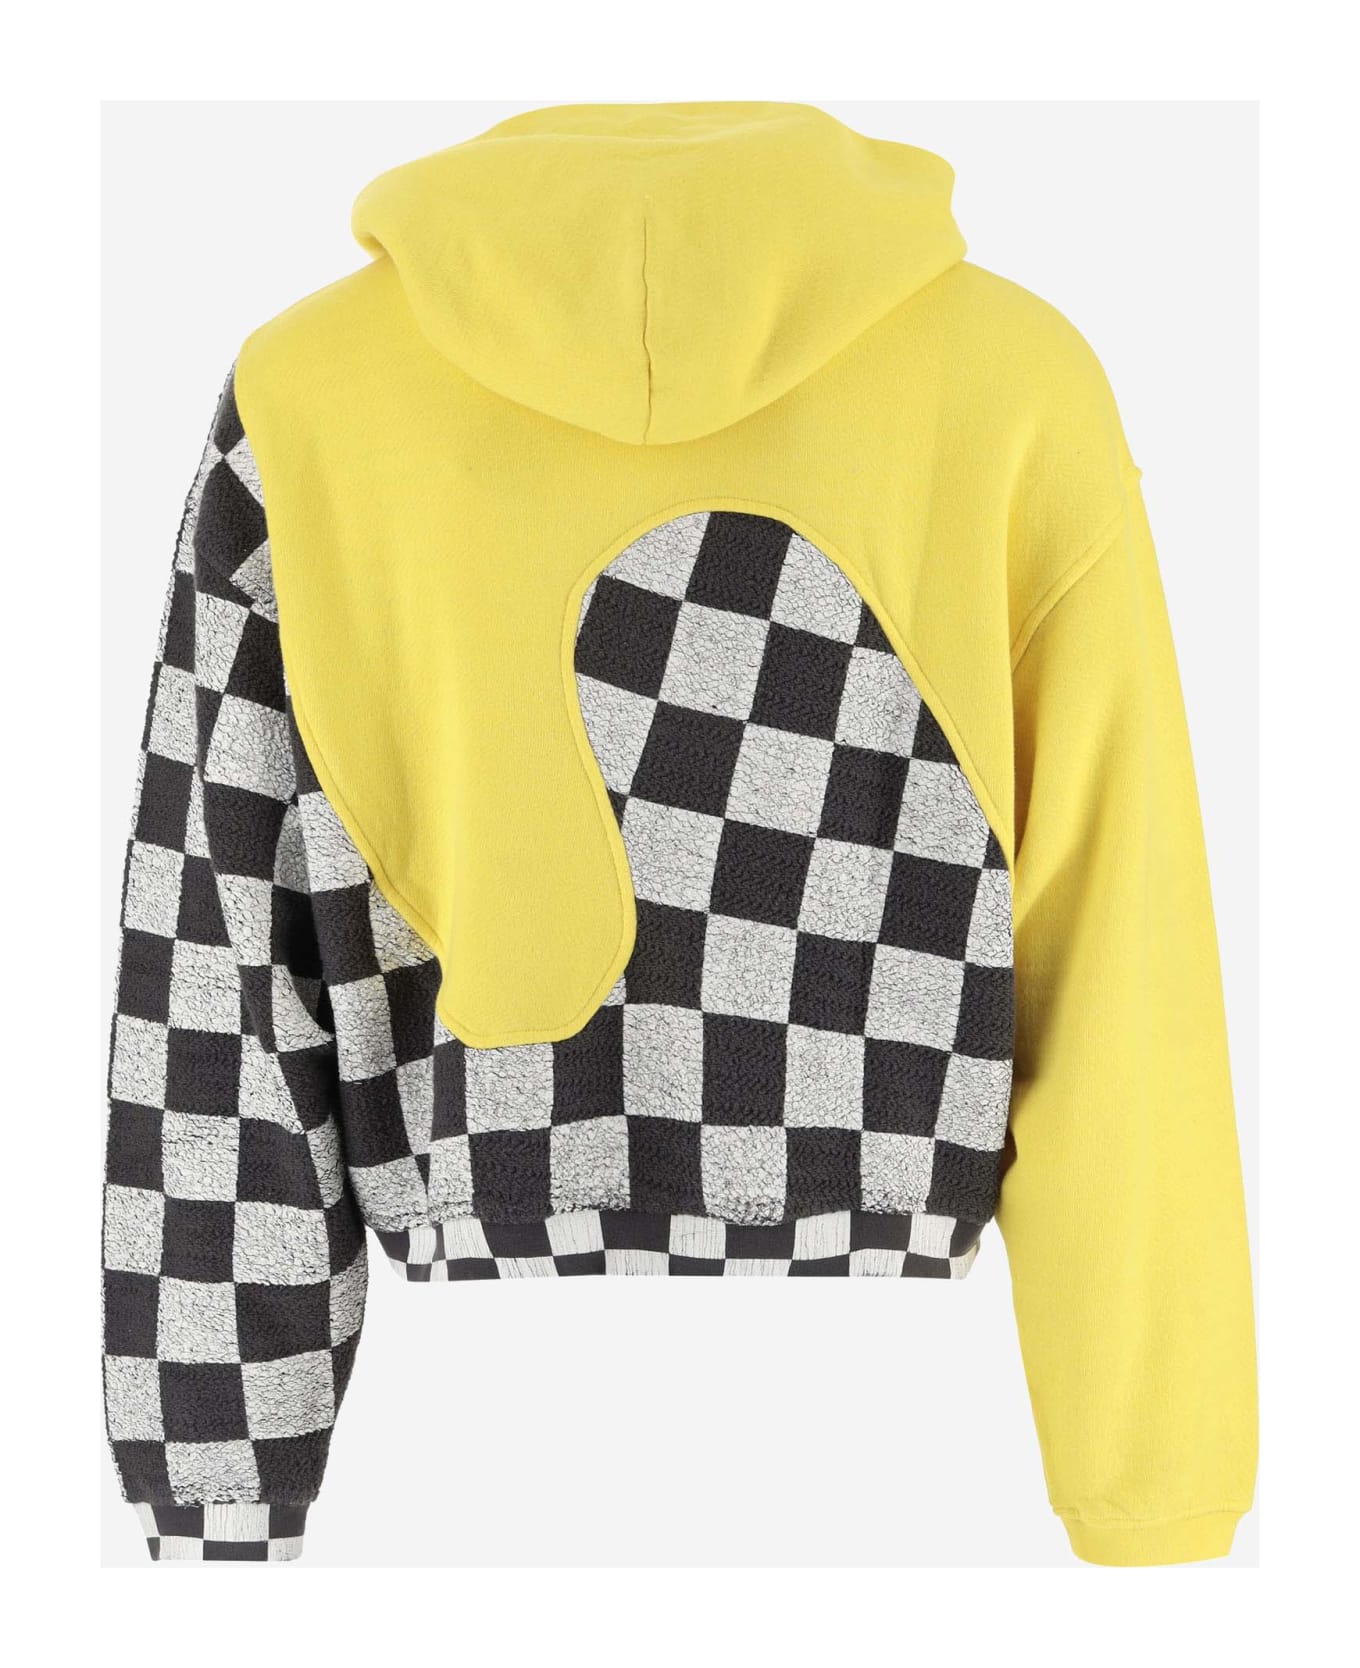 ERL Cotton Sweatshirt With Graphic Pattern - Yellow